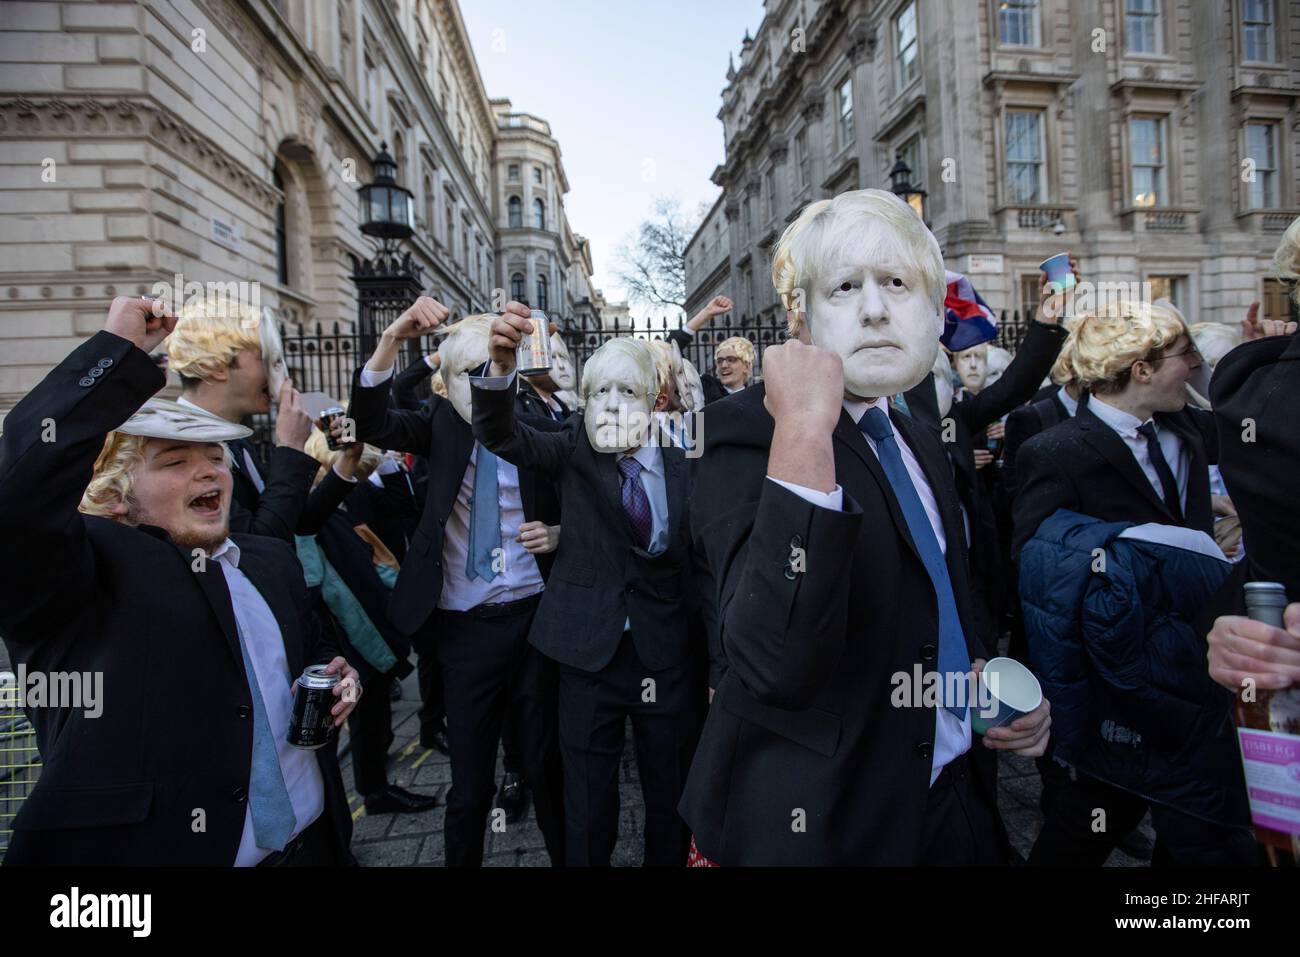 London, UK. 14 January 2022. Flash-mob of 'partygate' anti-Boris Johnson protesters wearing floppy blond wigs and Boris Johnson masks and suits gathered outside Downing Street drinking beer and wine while dancing to techno music and chanting 'This is a work event!' after the UK Prime Minister is under investigation for holding a drinks party at No.10 Downing Street on various occassions breaking the COVID lockdown restrictions during the pandemic.Friday 14th January 2022. Whitehall, London, England, United Kingdom Credit: Jeff Gilbert/Alamy Live News Stock Photo